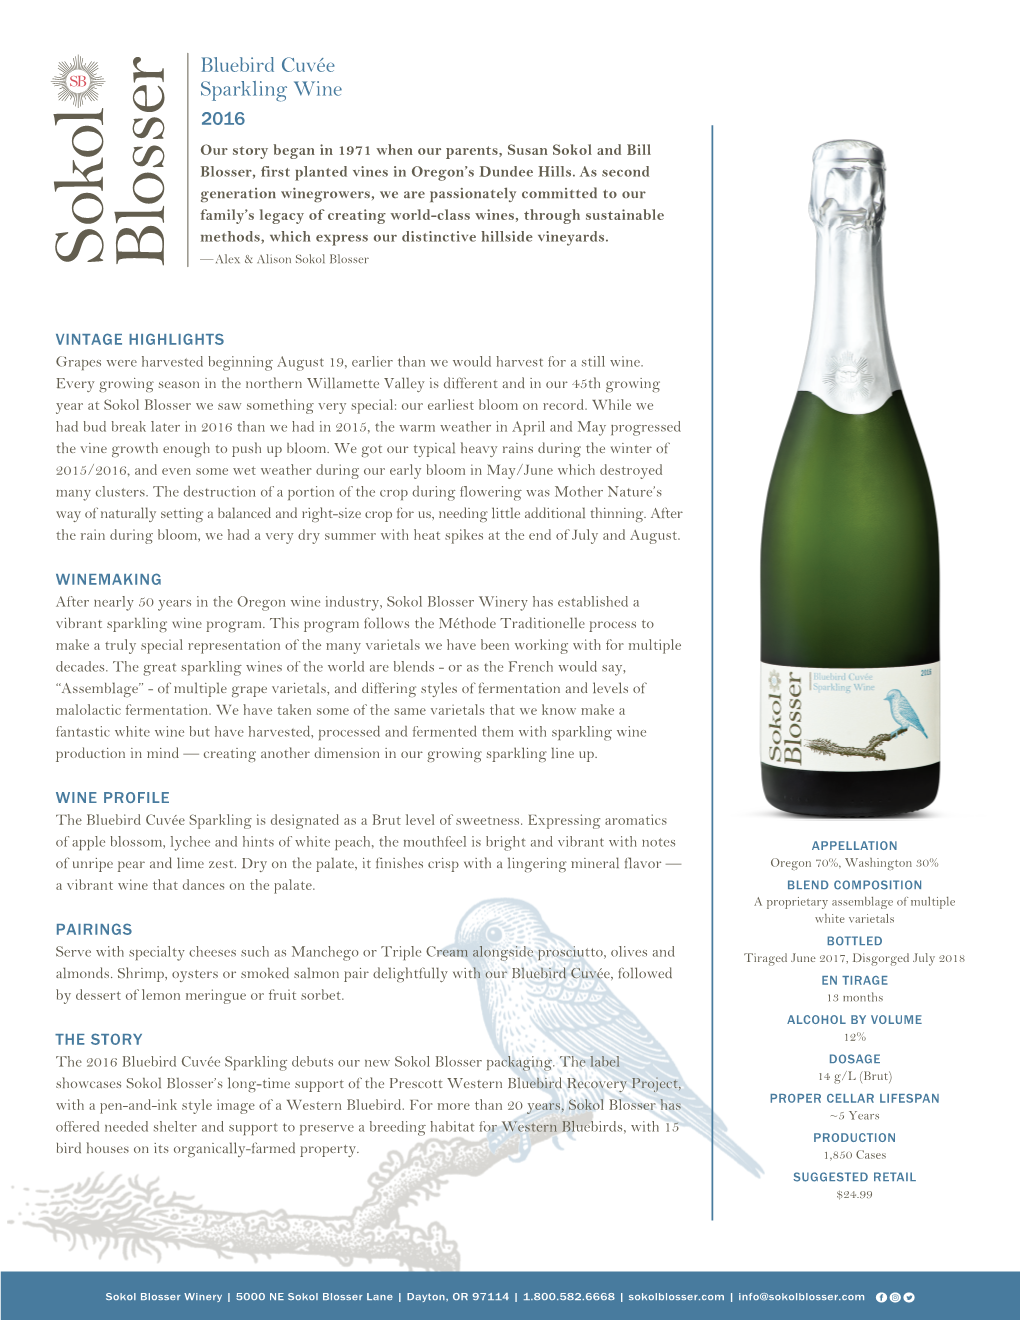 Bluebird Cuvée Sparkling Wine 2016 Our Story Began in 1971 When Our Parents, Susan Sokol and Bill Blosser, First Planted Vines in Oregon’S Dundee Hills